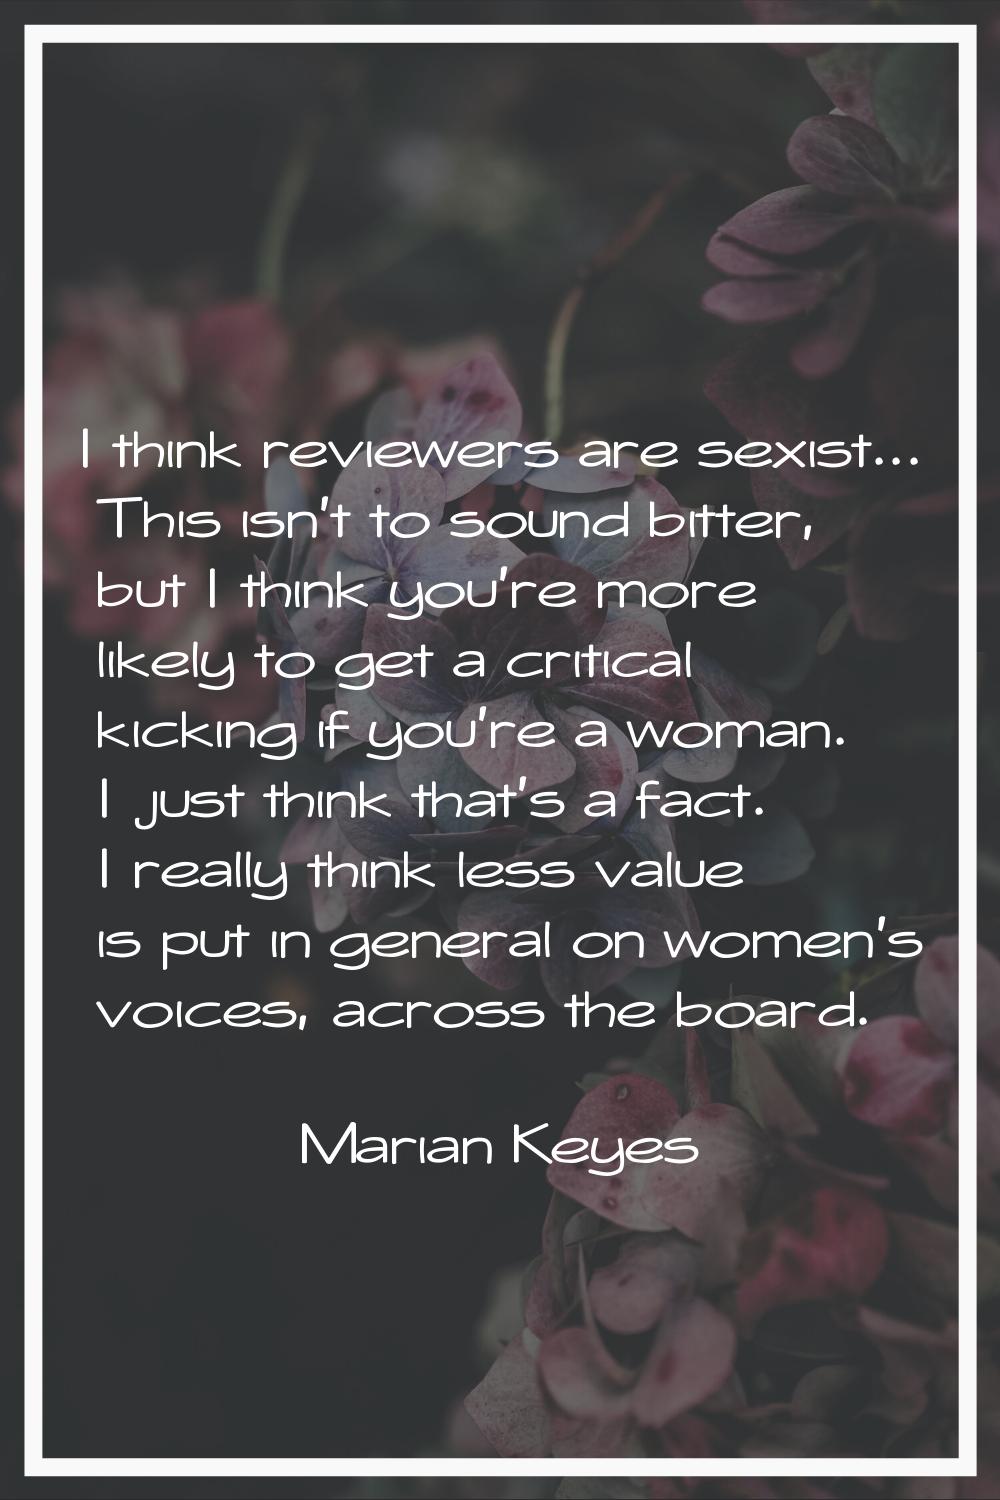 I think reviewers are sexist... This isn't to sound bitter, but I think you're more likely to get a